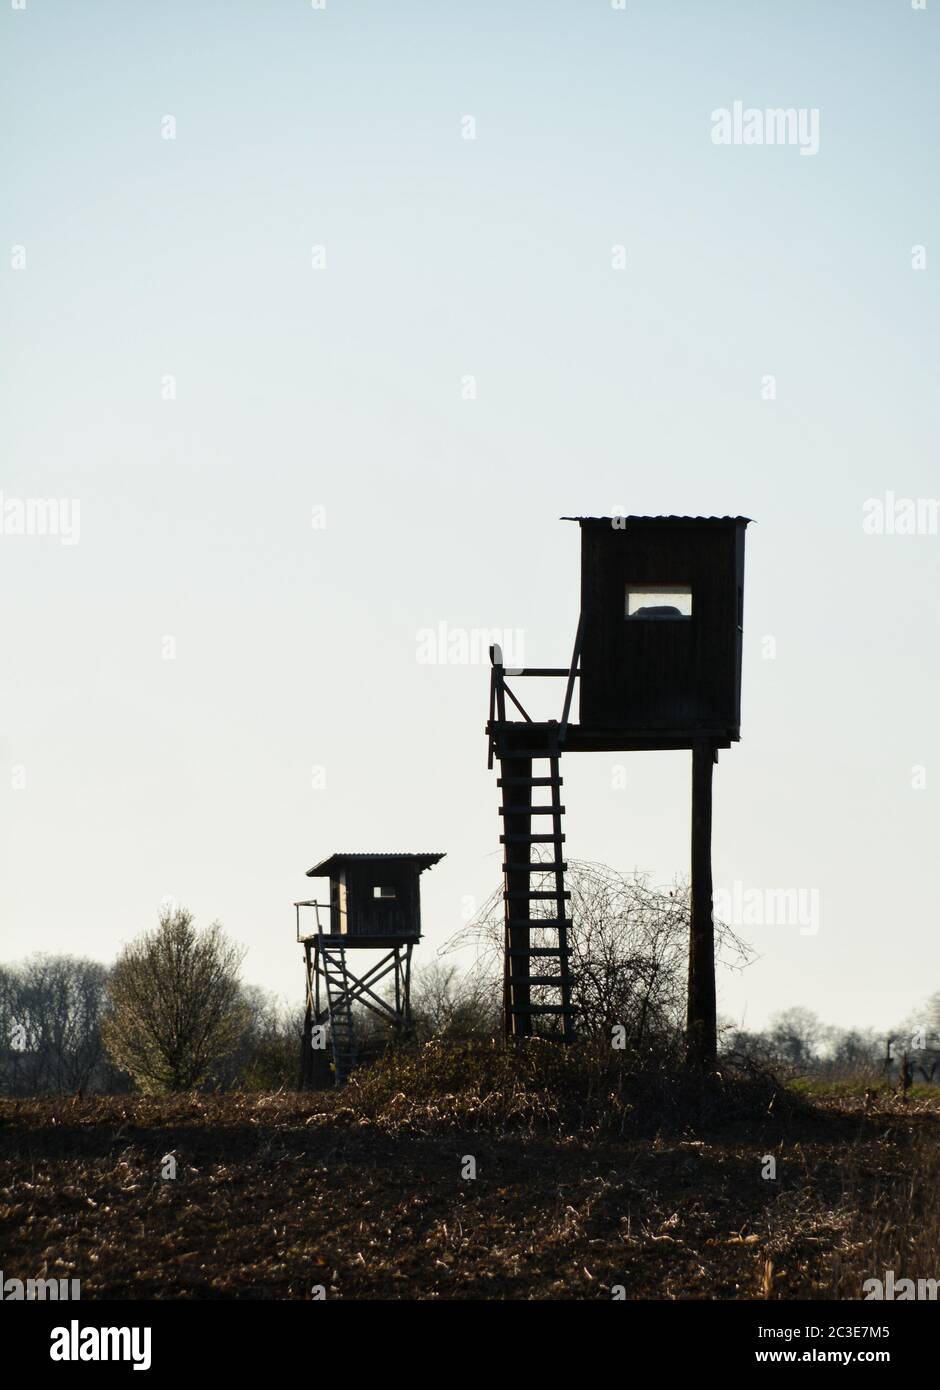 Watch towers on a border in a field Stock Photo